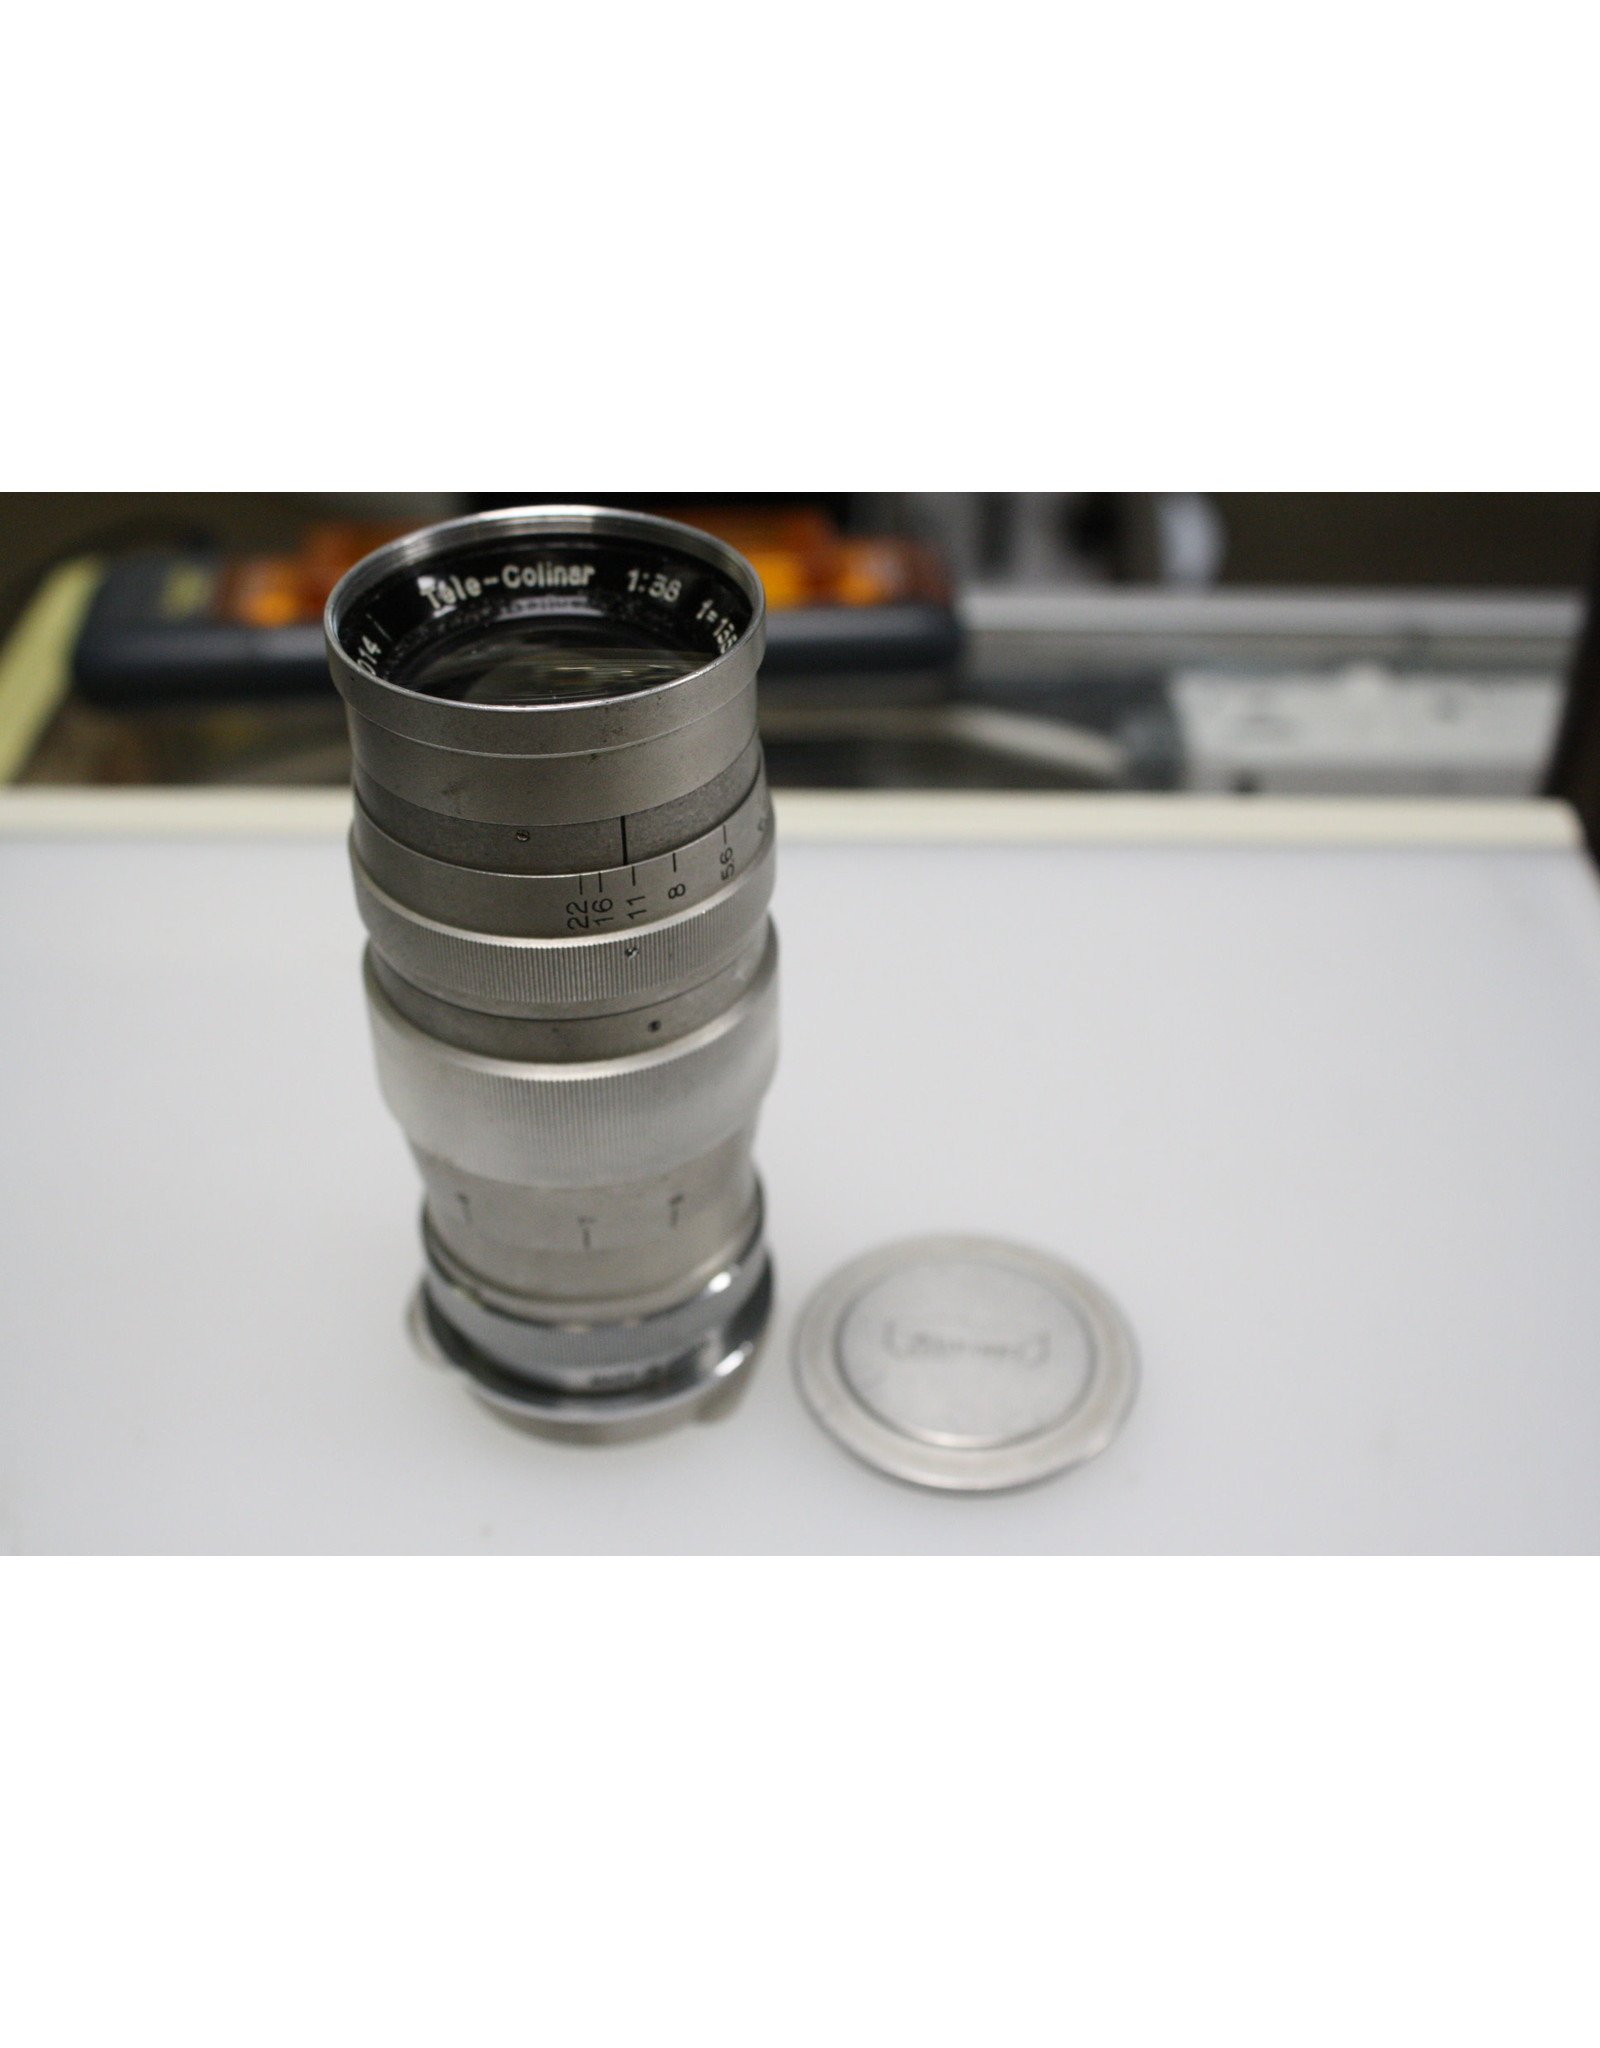 Arco C Tele-Colinar 135mm F3.8 for Leica M39 Mount with case